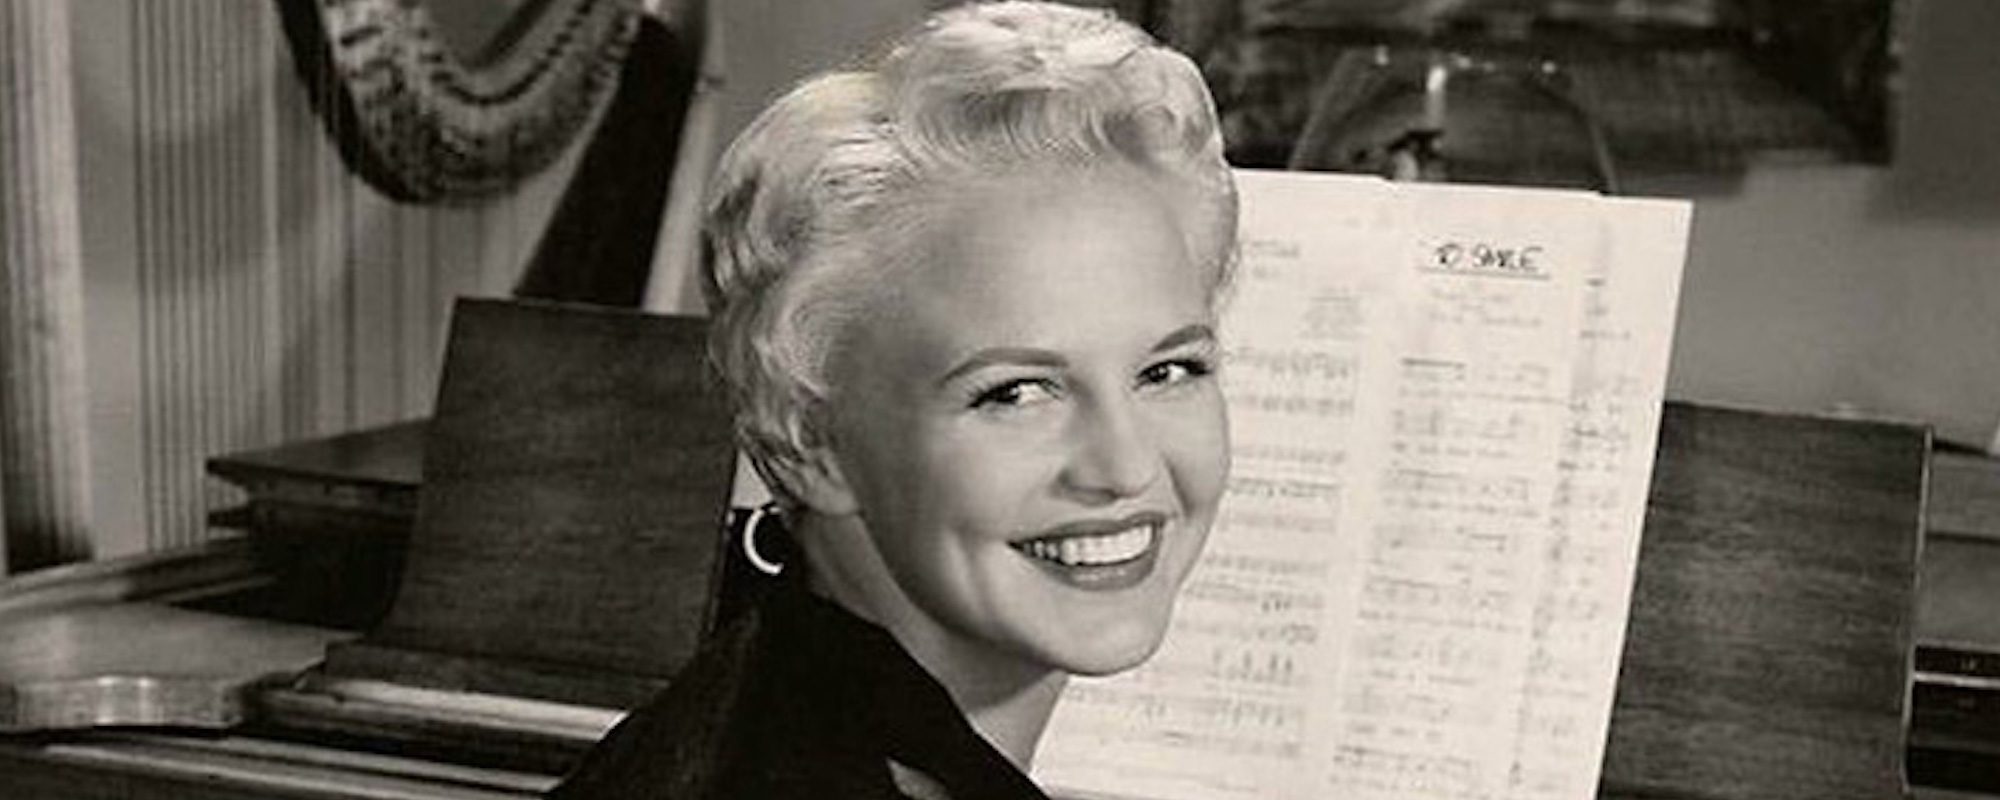 5 Songs You Didn't Know Peggy Lee Wrote - American Songwriter